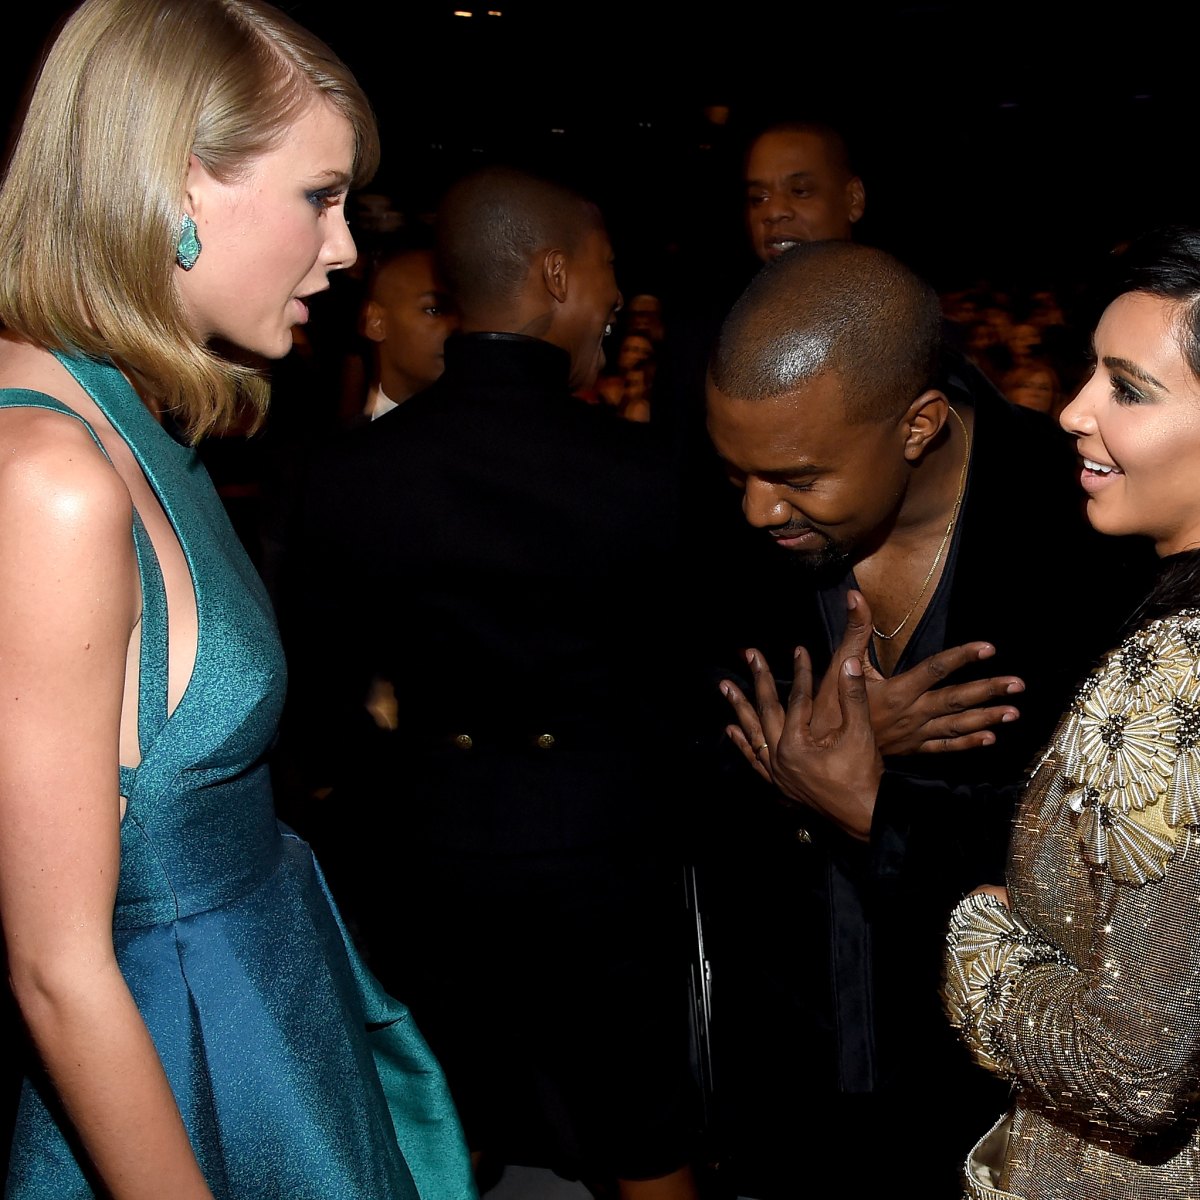 Kim Kardashian West on What Happened Between Kanye and Taylor